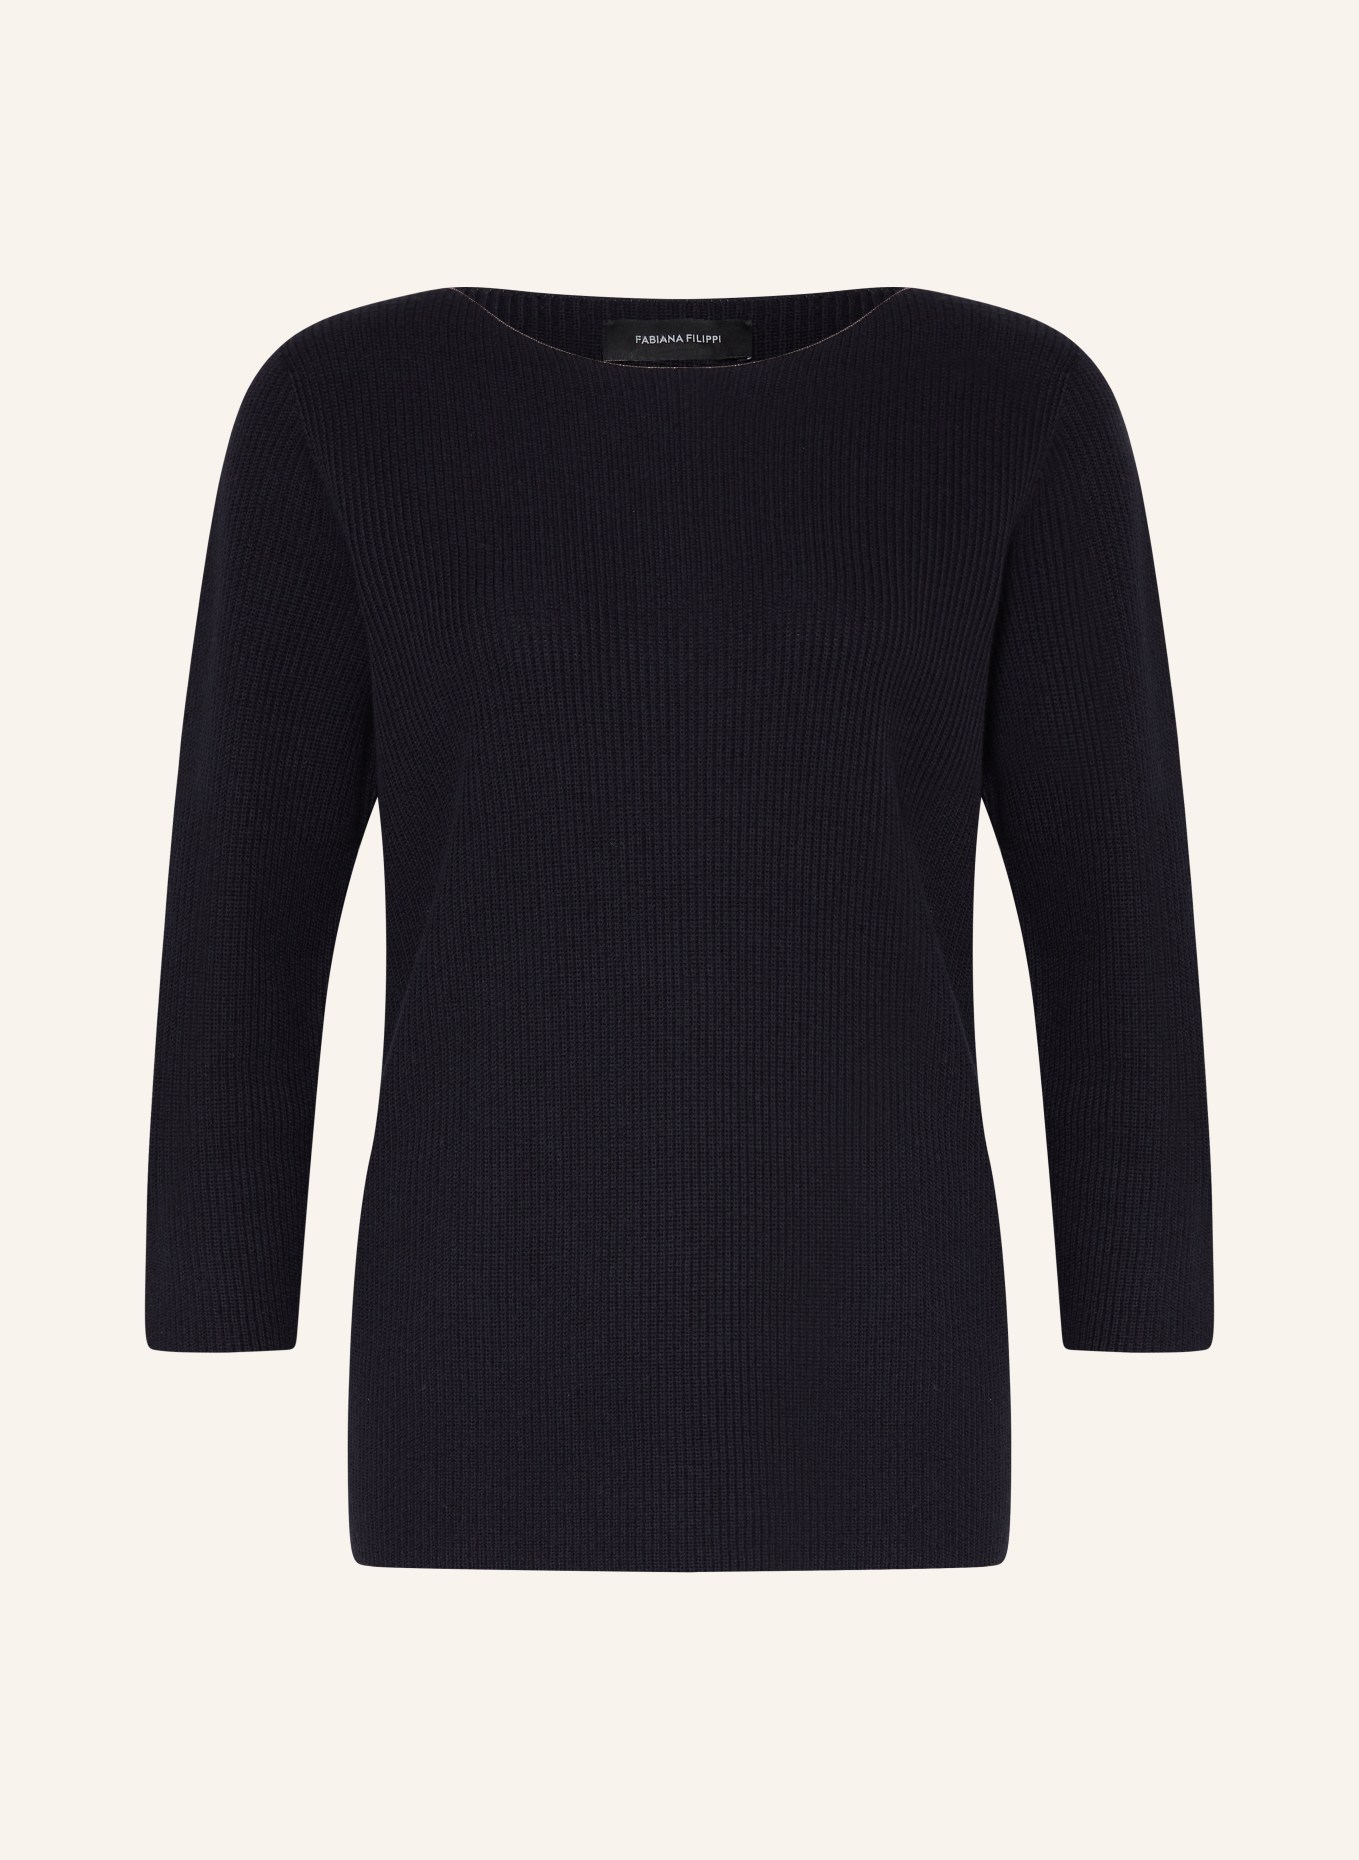 FABIANA FILIPPI Sweater with 3/4 sleeves and decorative beads, Color: DARK BLUE (Image 1)